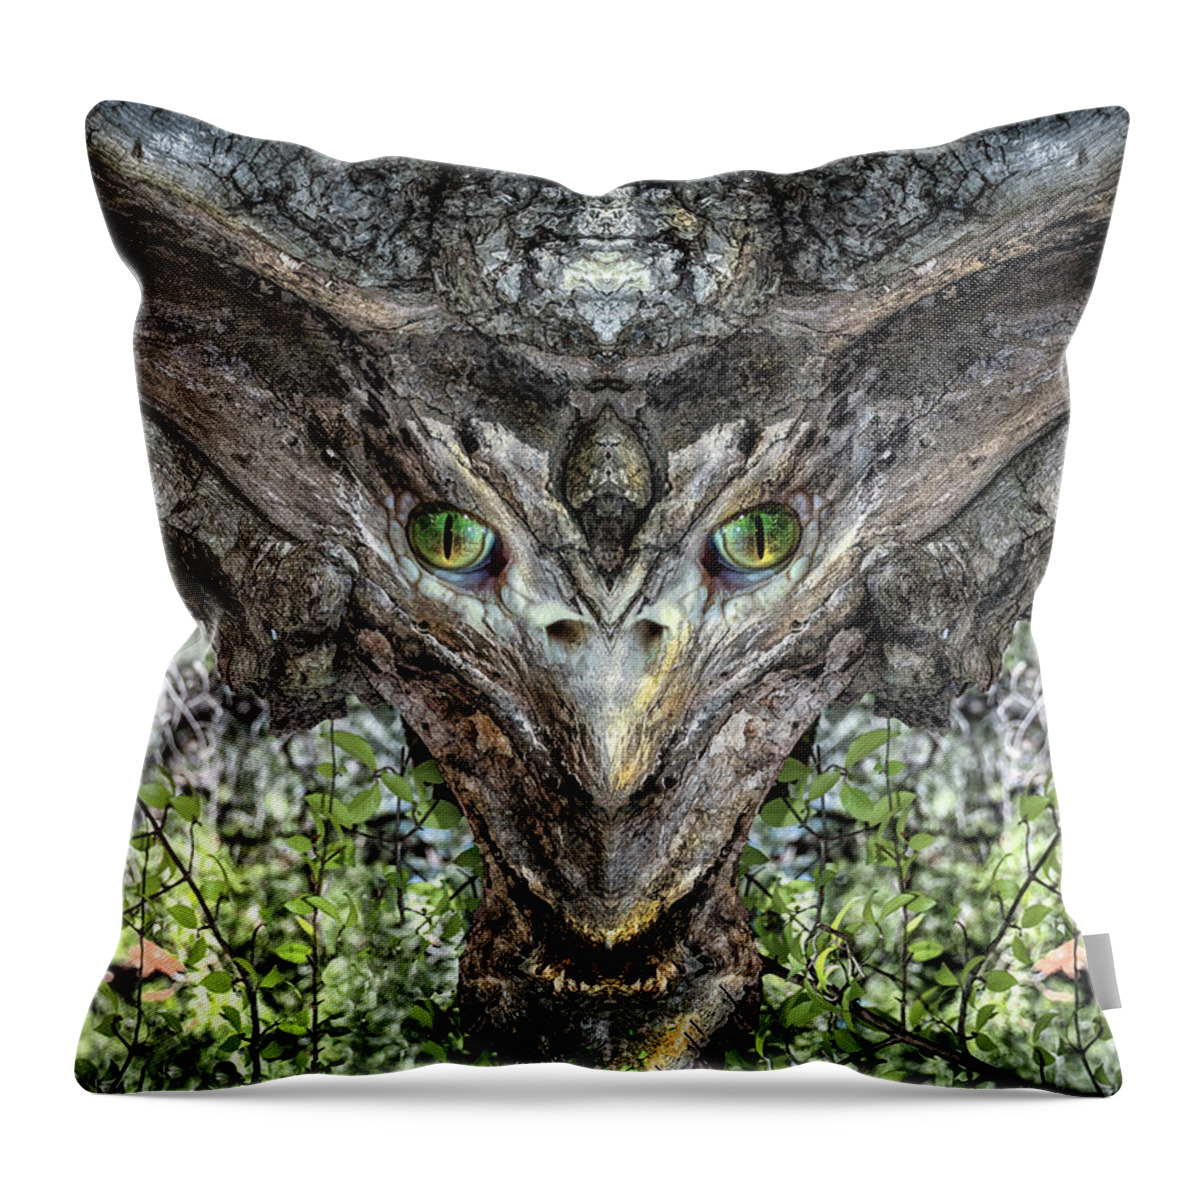 Woody Throw Pillow featuring the digital art Woody 213 by Rick Mosher